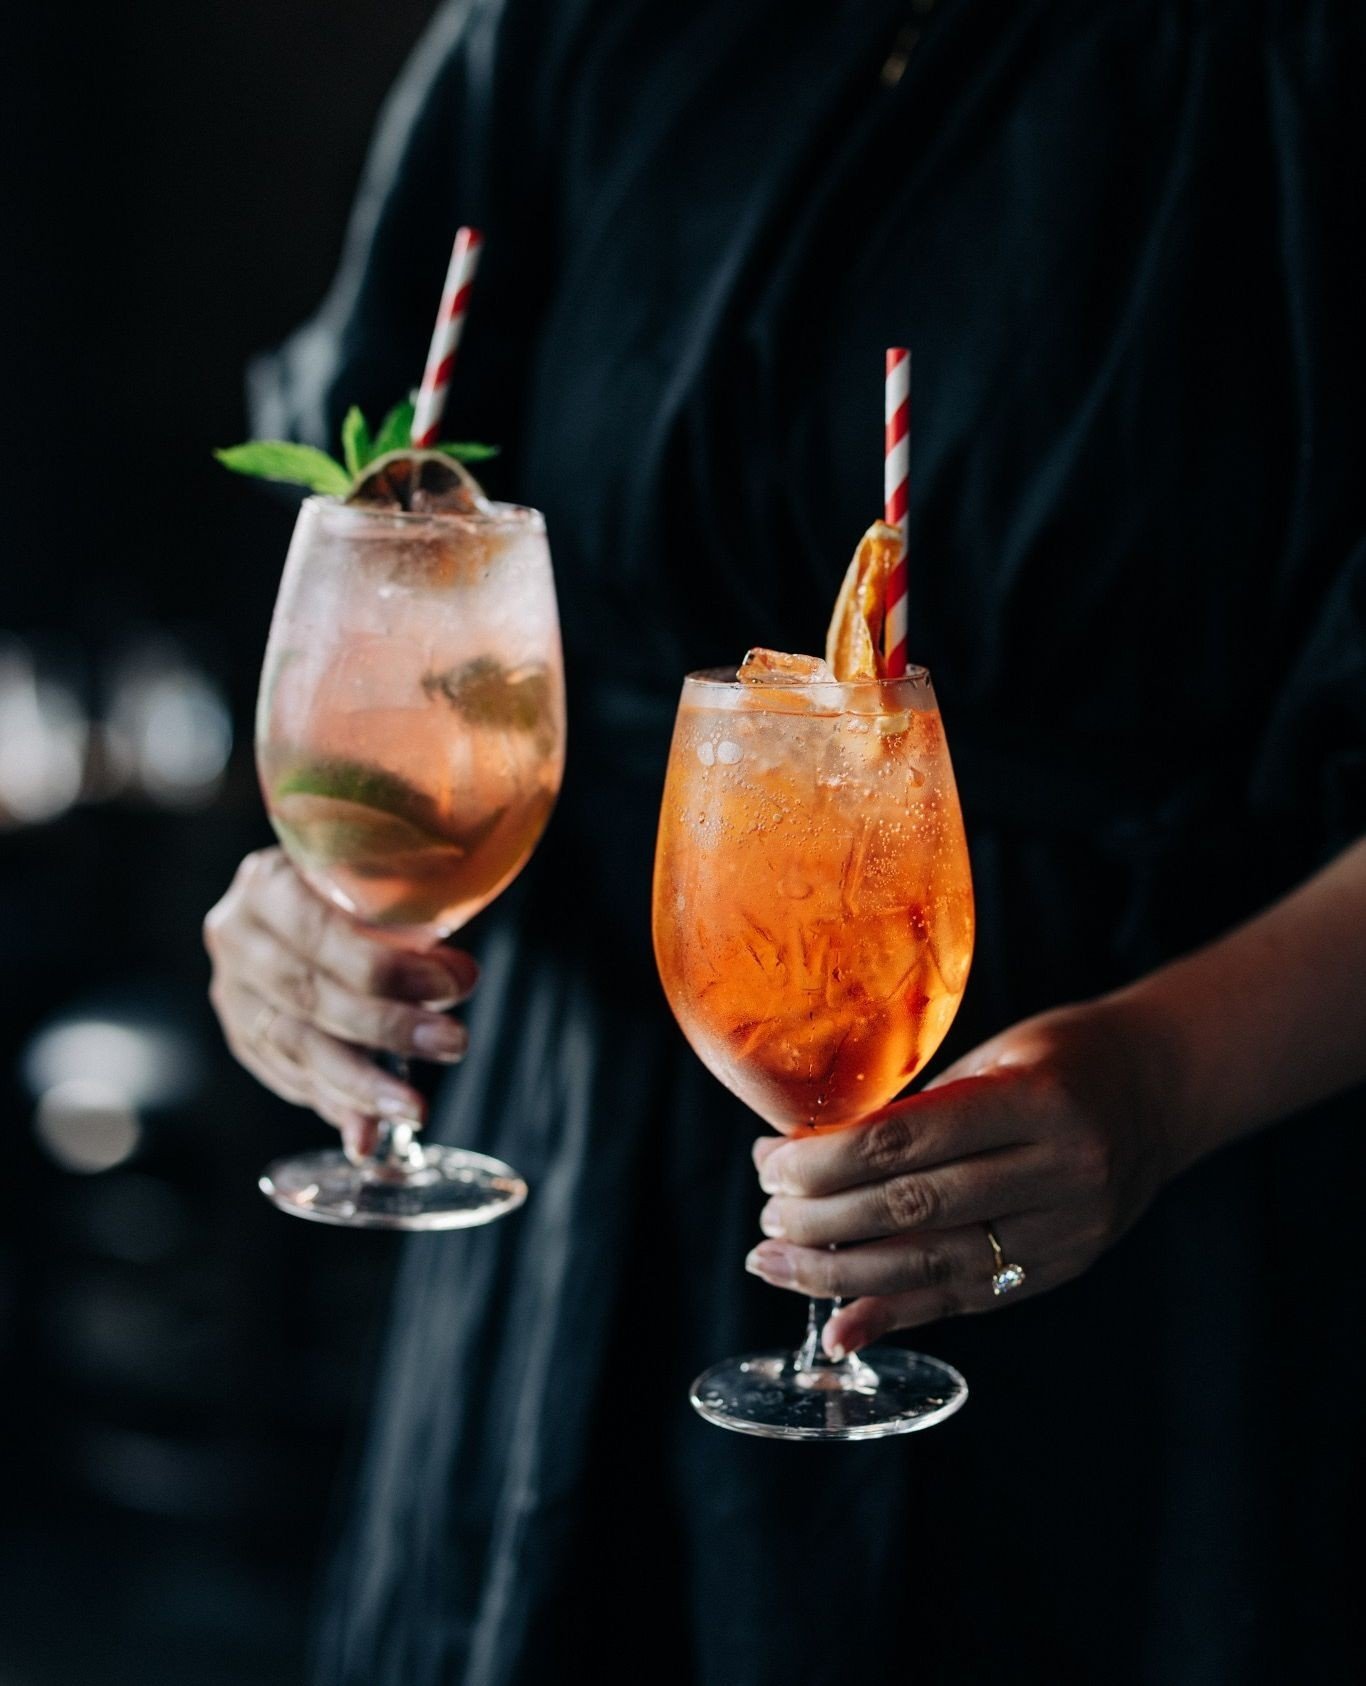 Got your sights set on an afternoon drink? 🥂 You know where to go! Book your table online or walk in from 5pm. #parrystgarage